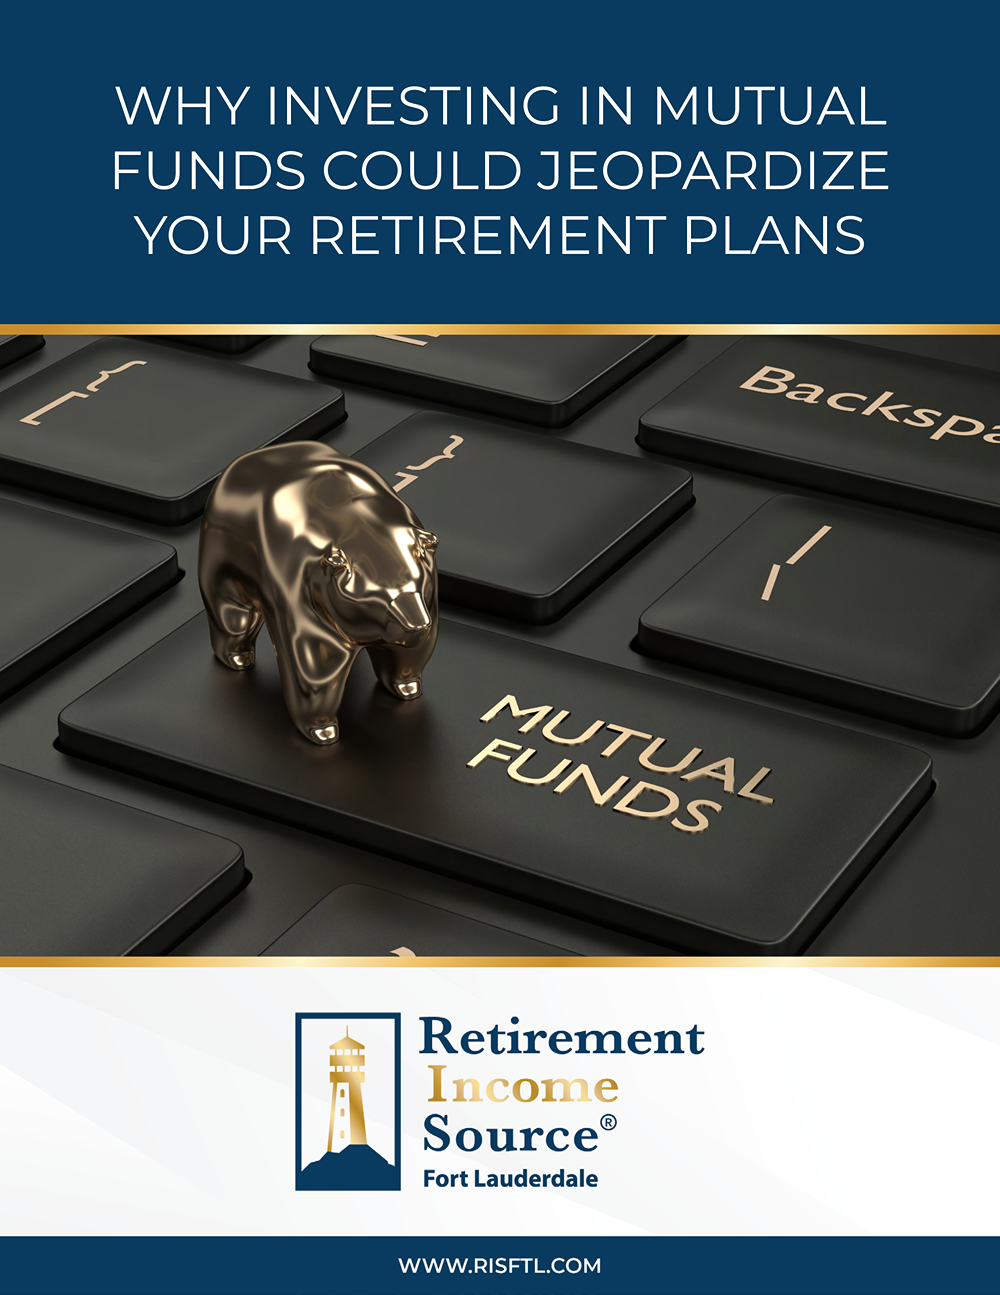 Why Investing in Mutual Funds Could Jeopardize Your Retirement Plans